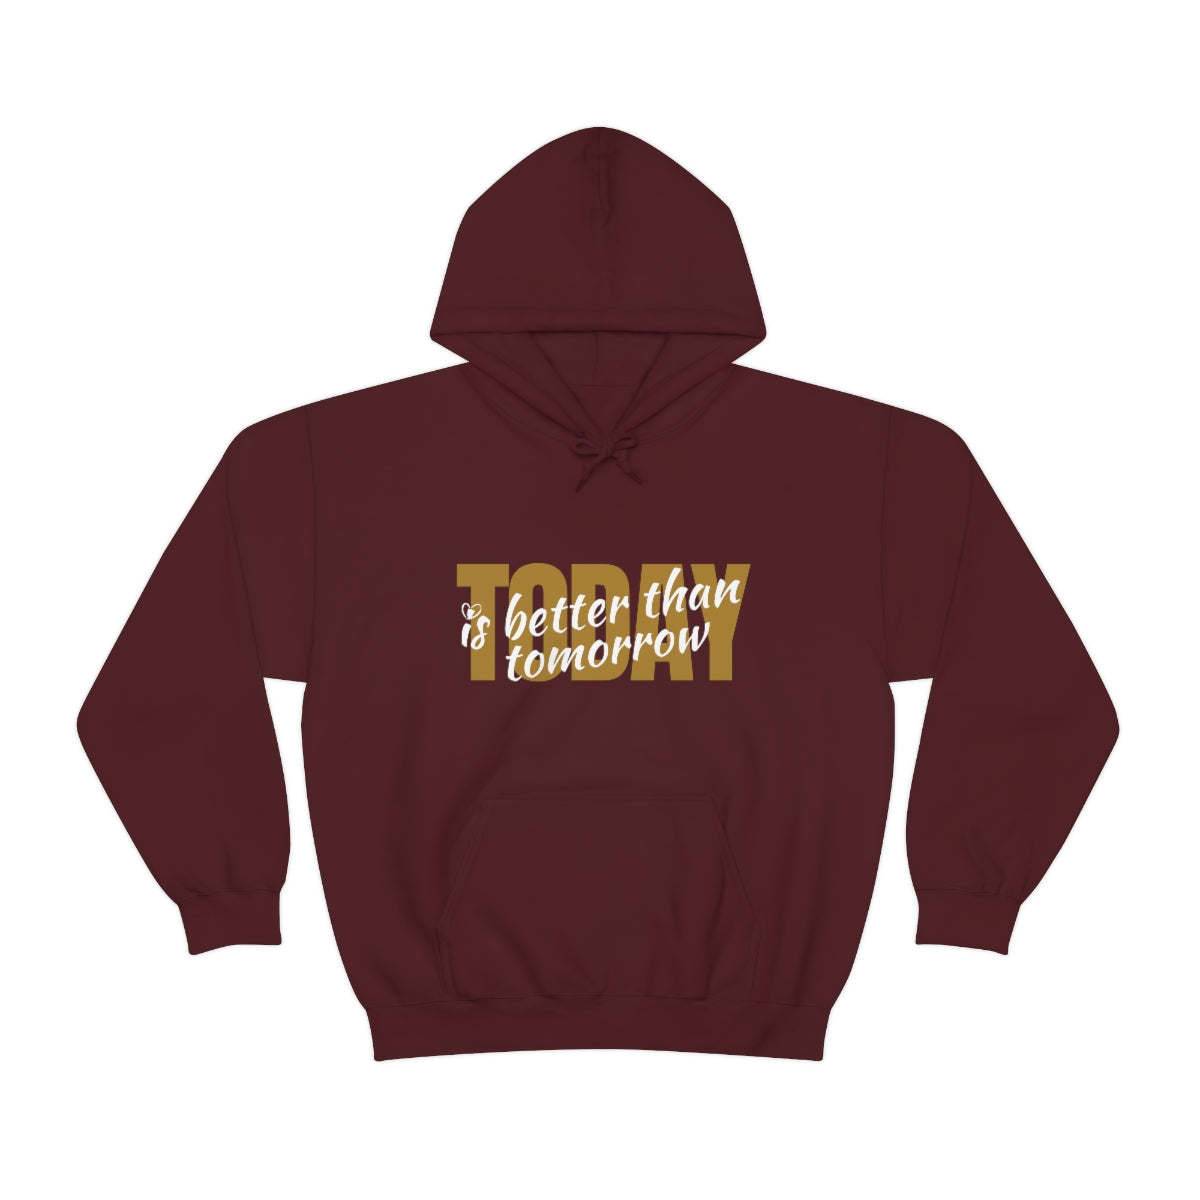 TODAY IS BETTER THAN TOMORROW HOODIE-Hoodie-Maroon-S-mysticalcherry